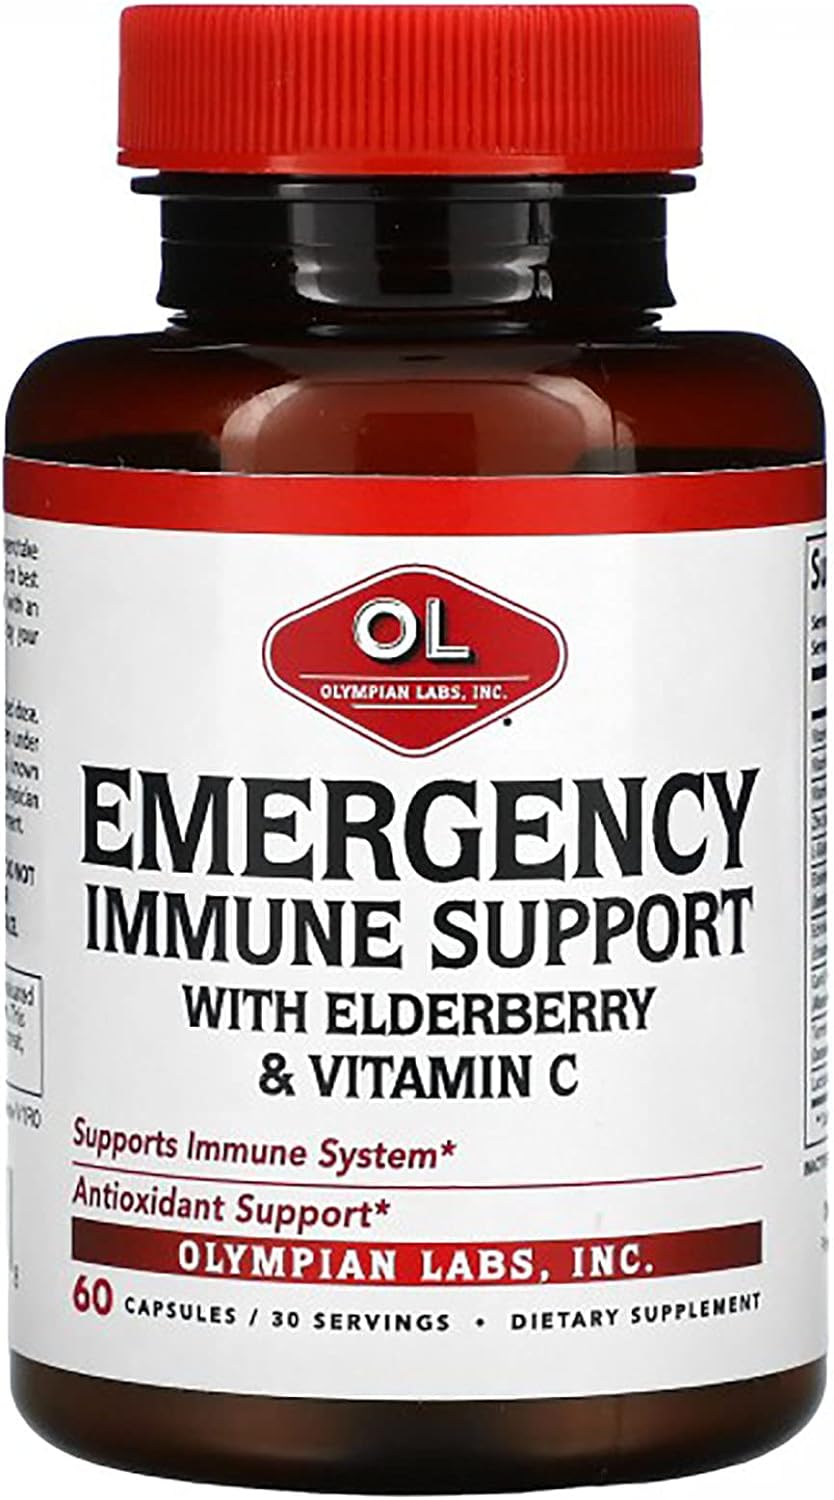 Olympian Labs Emergency Immune Support with Elberberry and Vitamin C | Supports Immune System | Antioxident | 60 Capsules : Health & Household